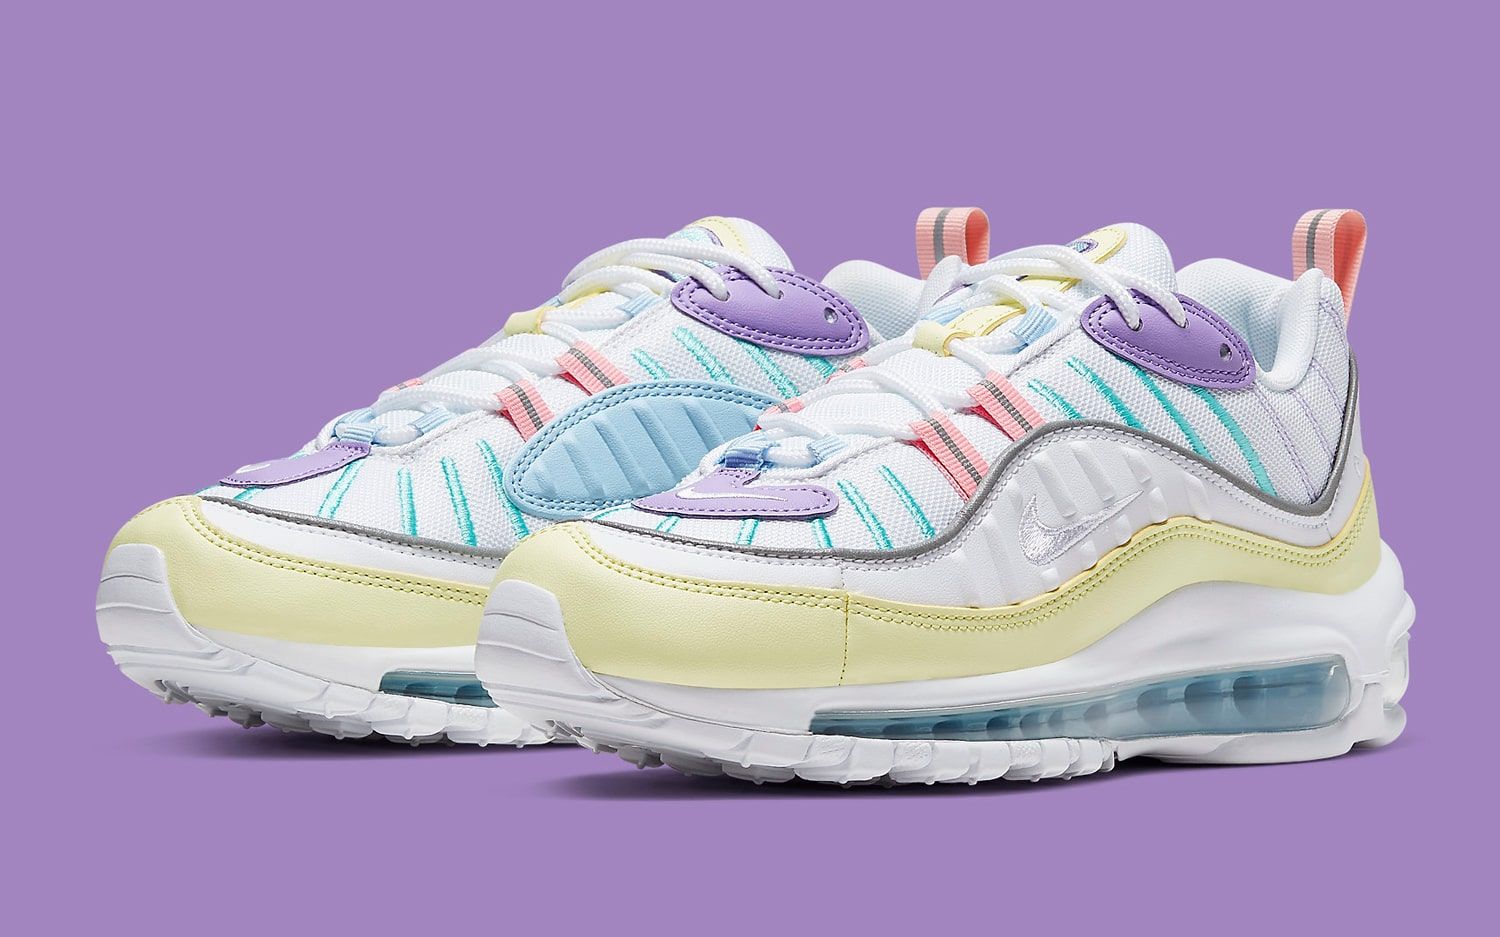 Easter-Themed Air Max 98s 